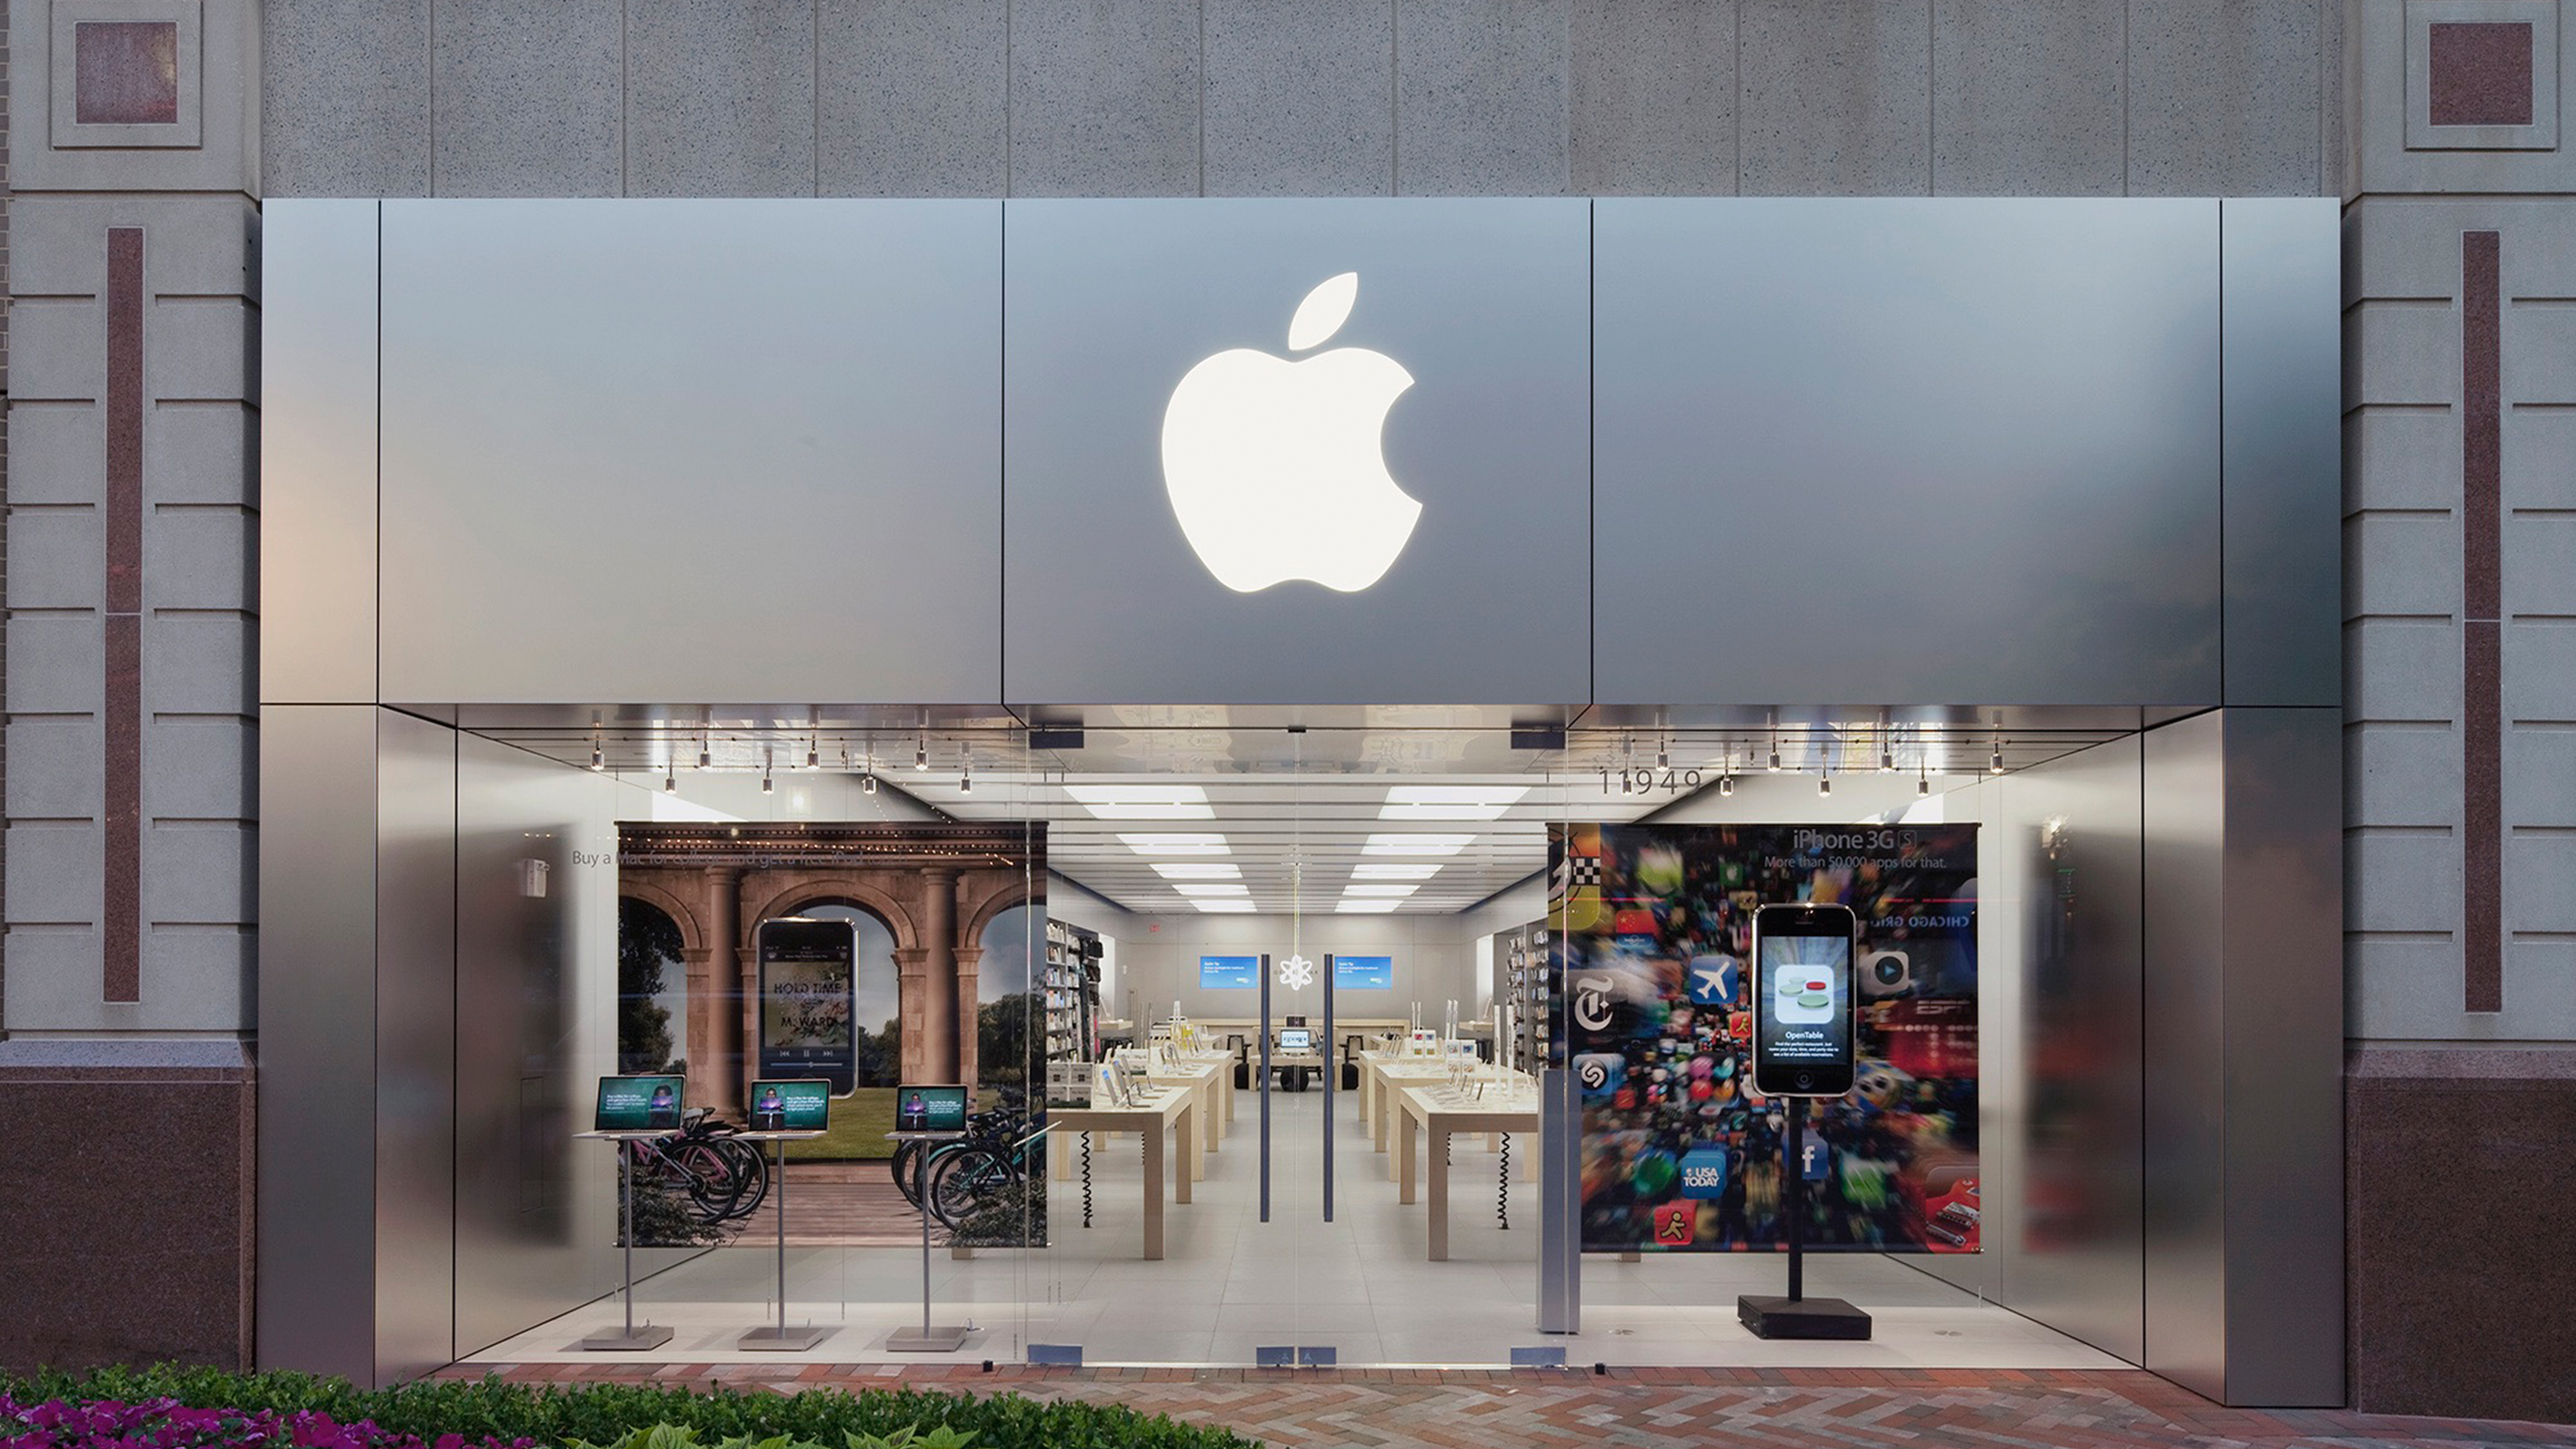 Apple may be planning to relocate its first retail store at Tysons Corner -  9to5Mac